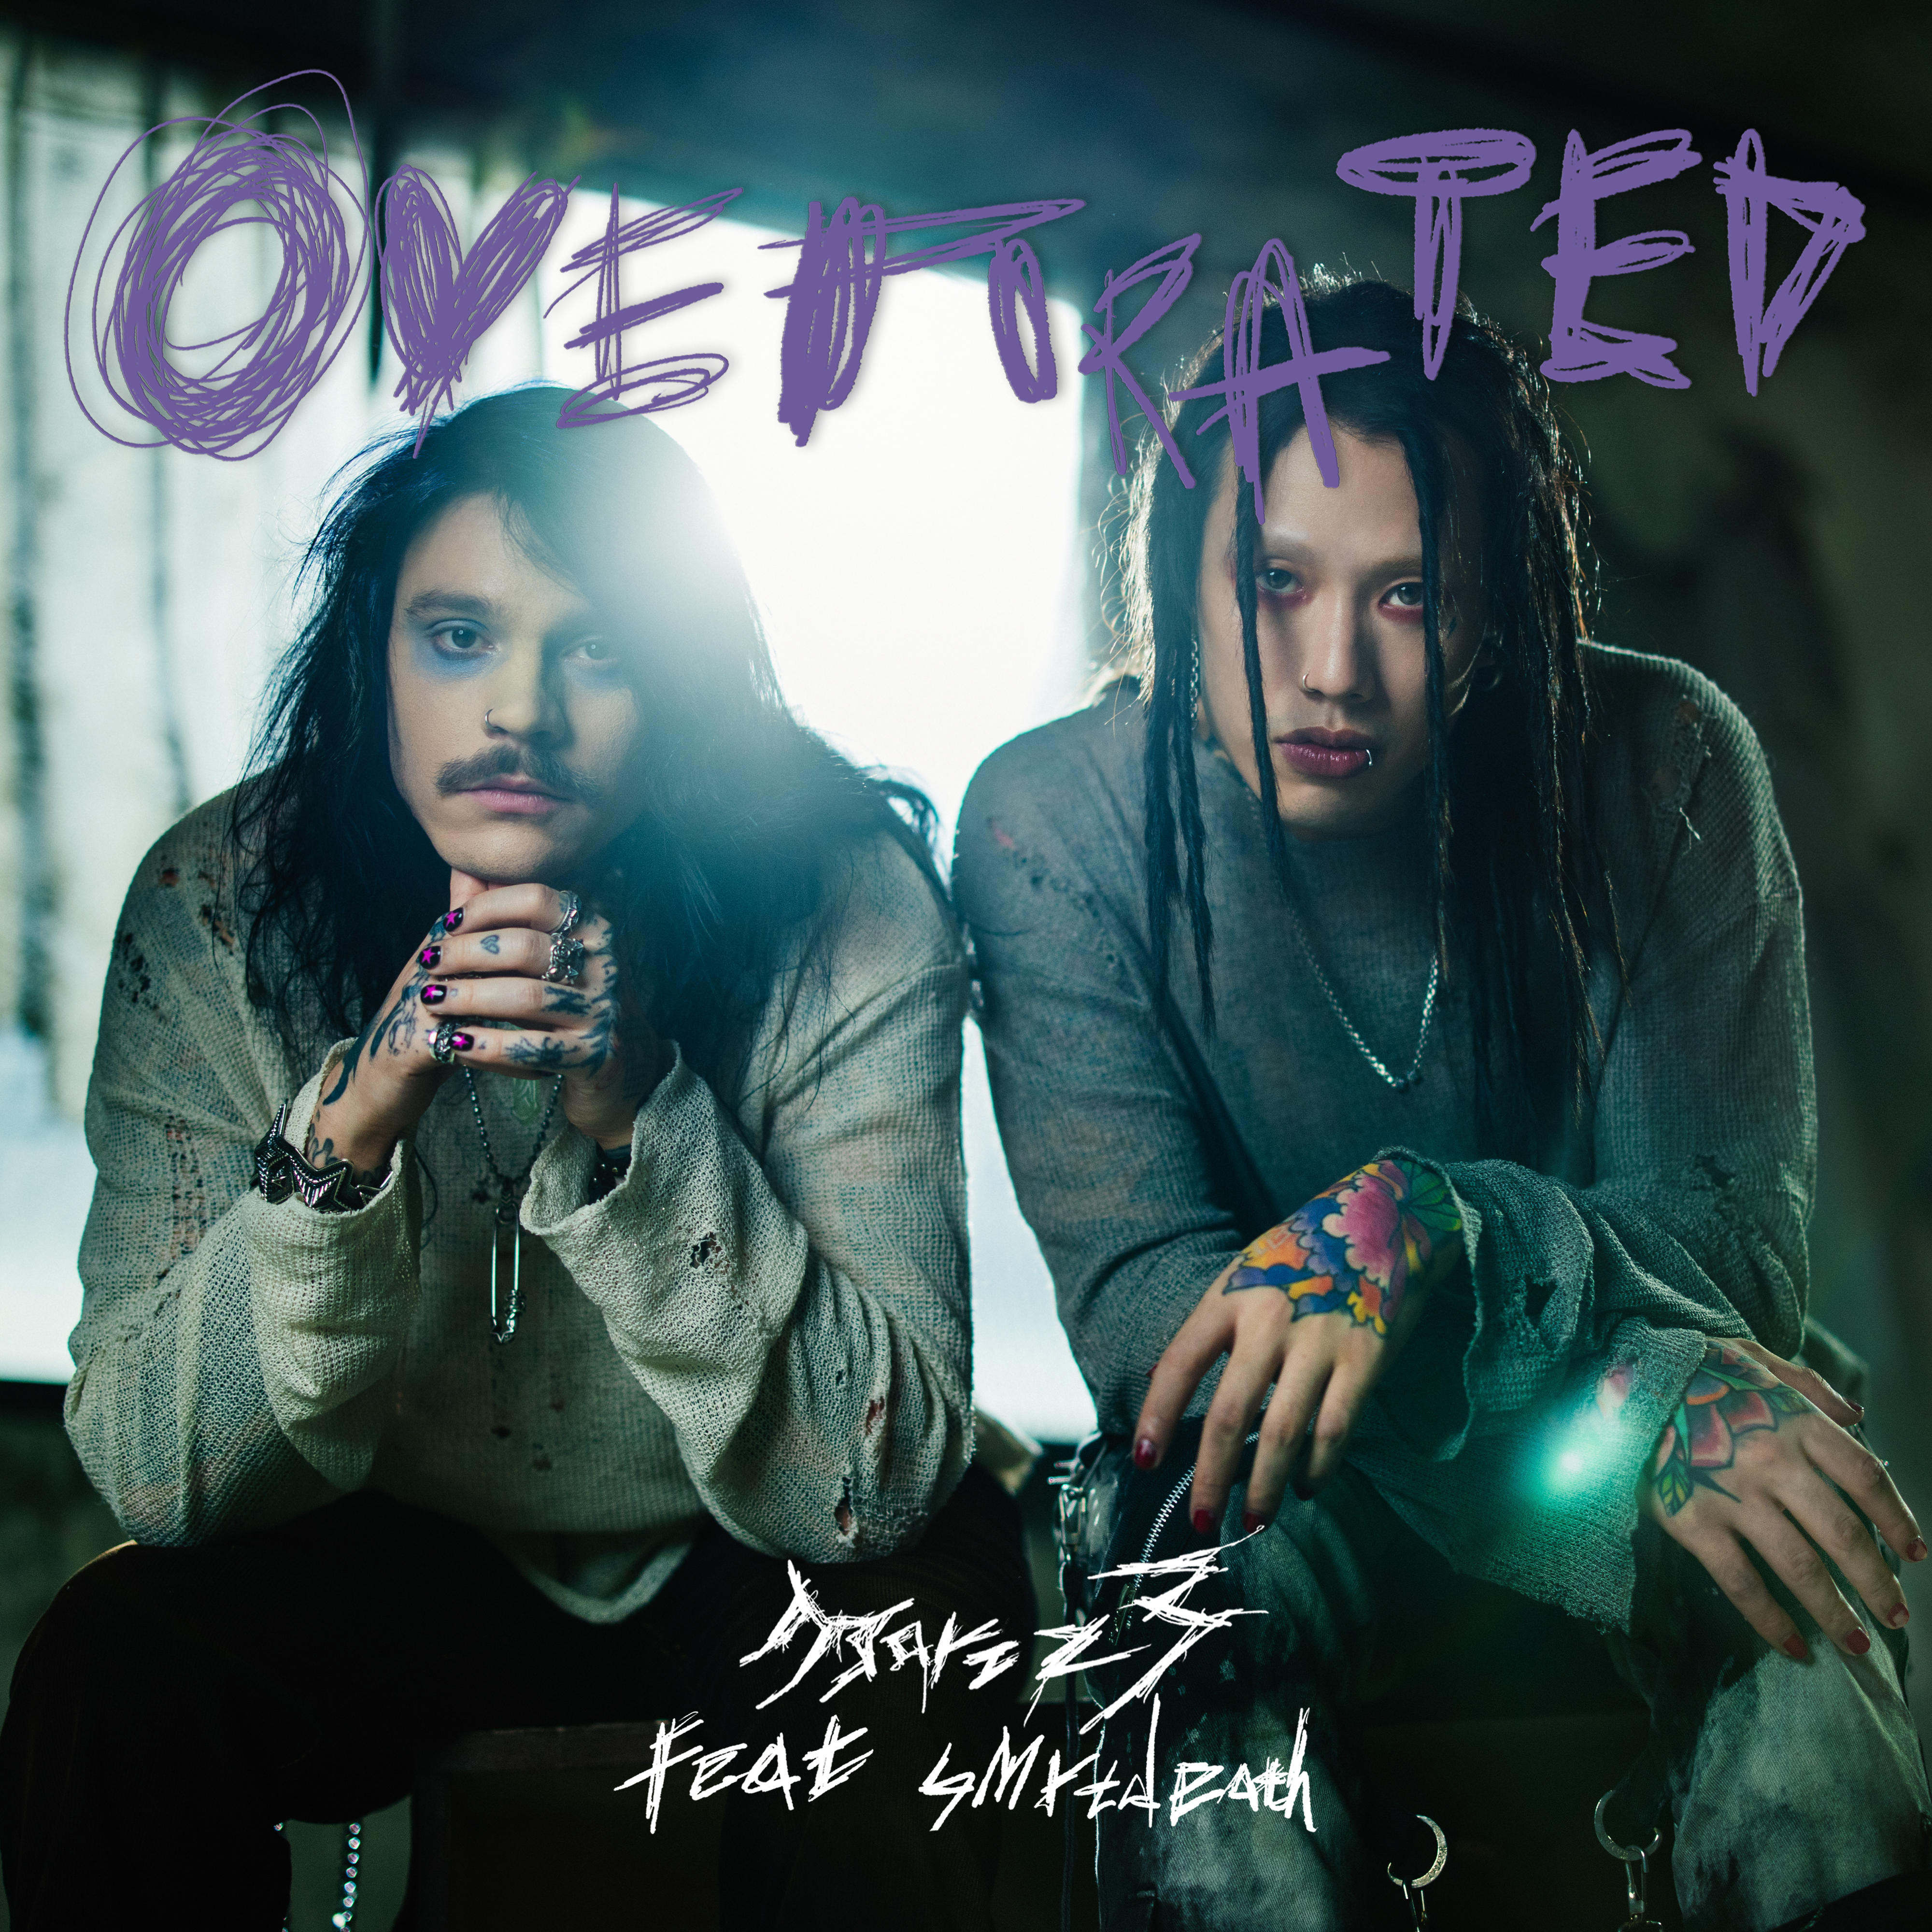 overrated (feat. smrtdeath) 專輯封面